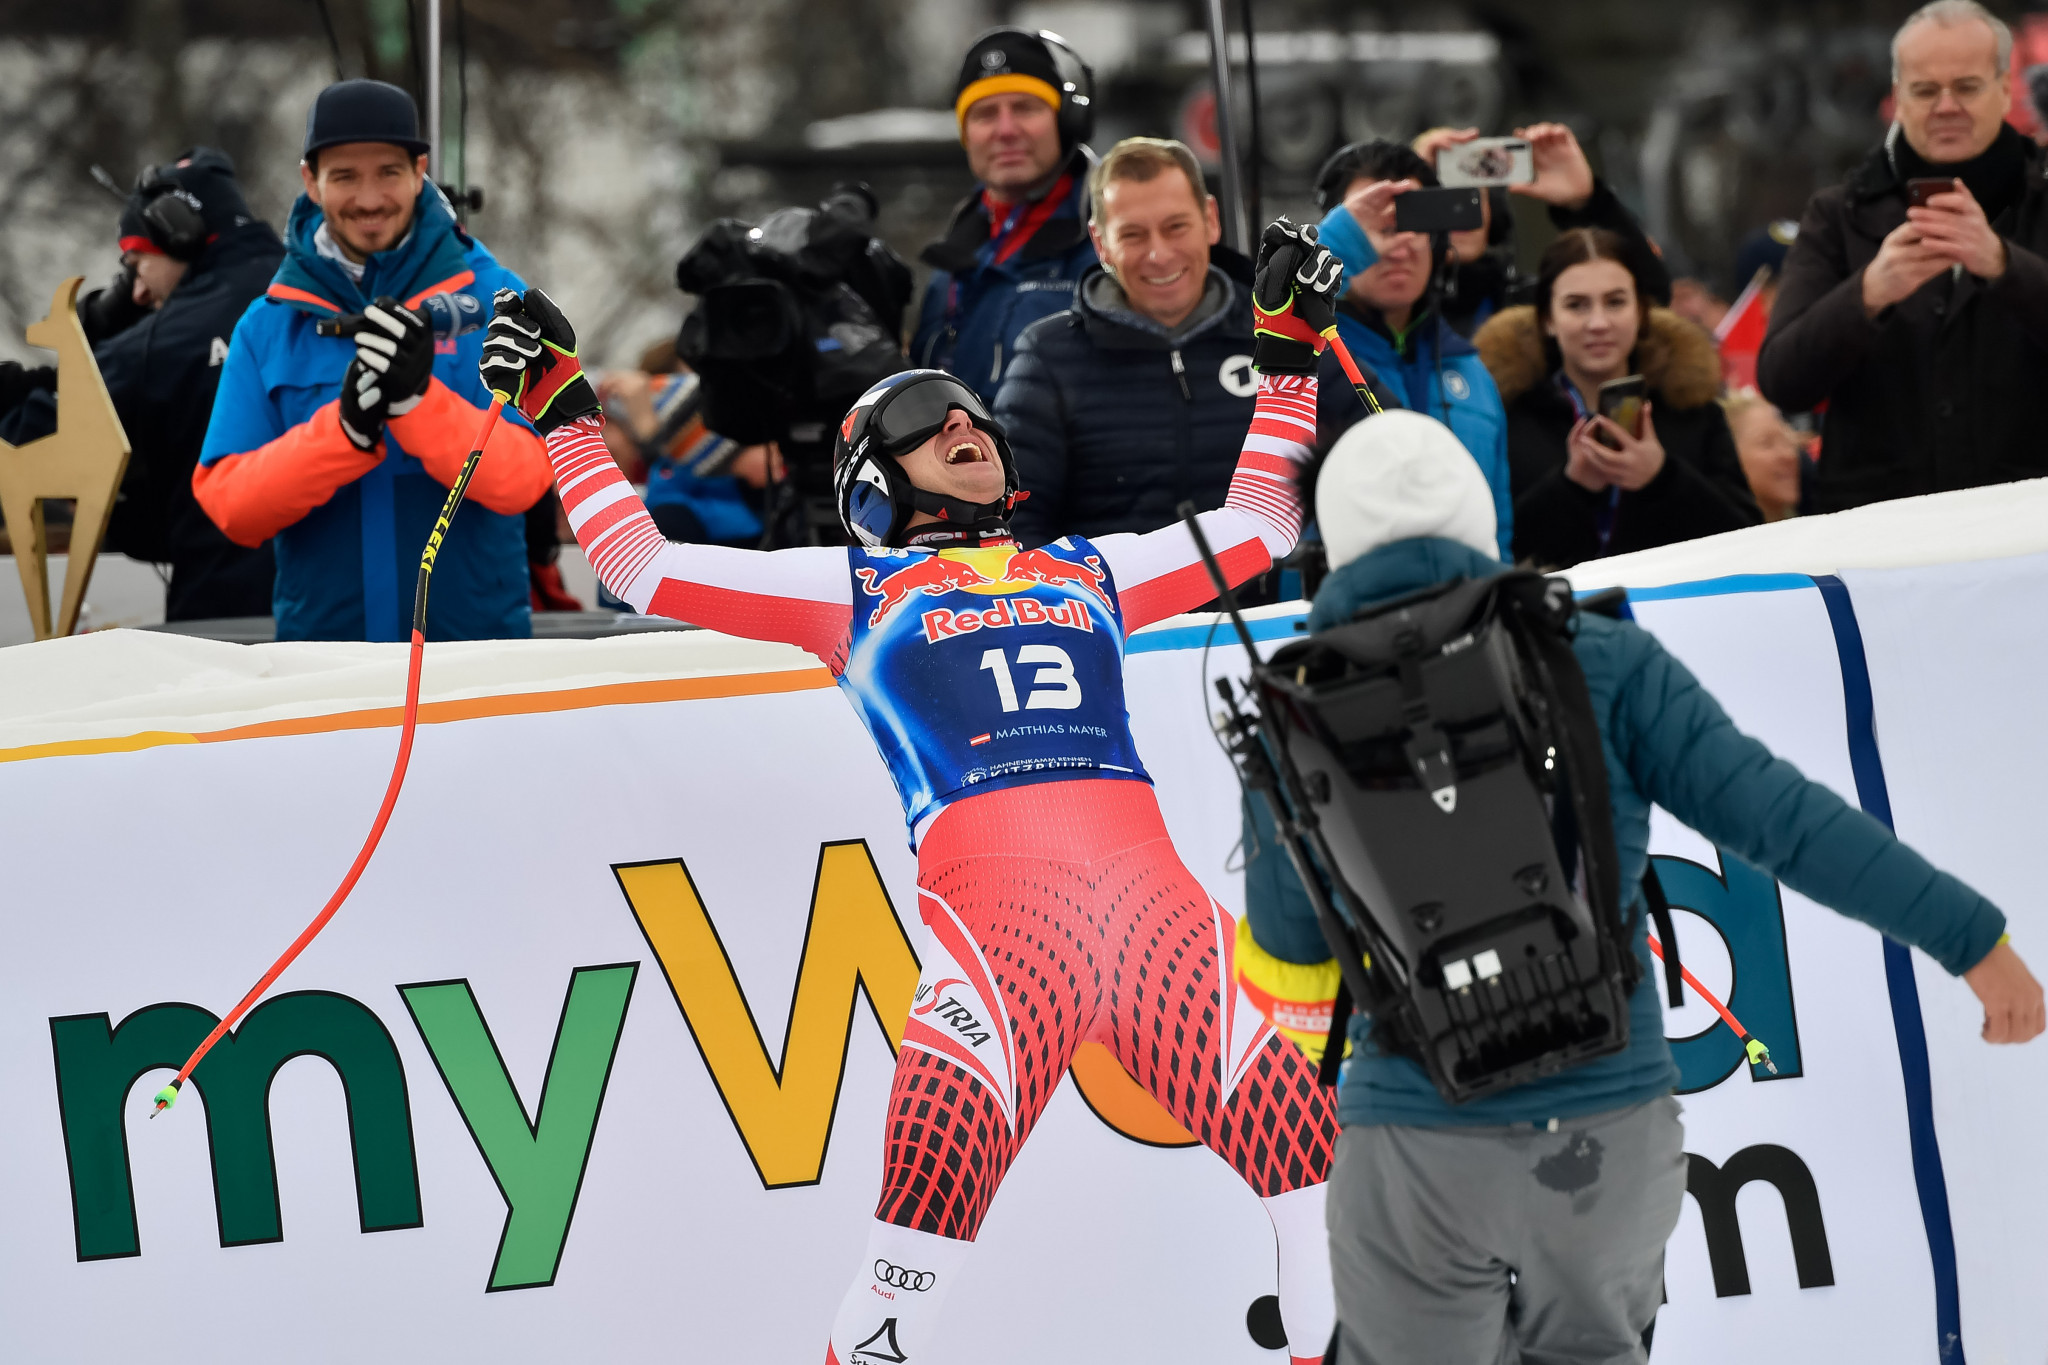 Home skier Mayer earns downhill win at FIS World Cup in Kitzbühel